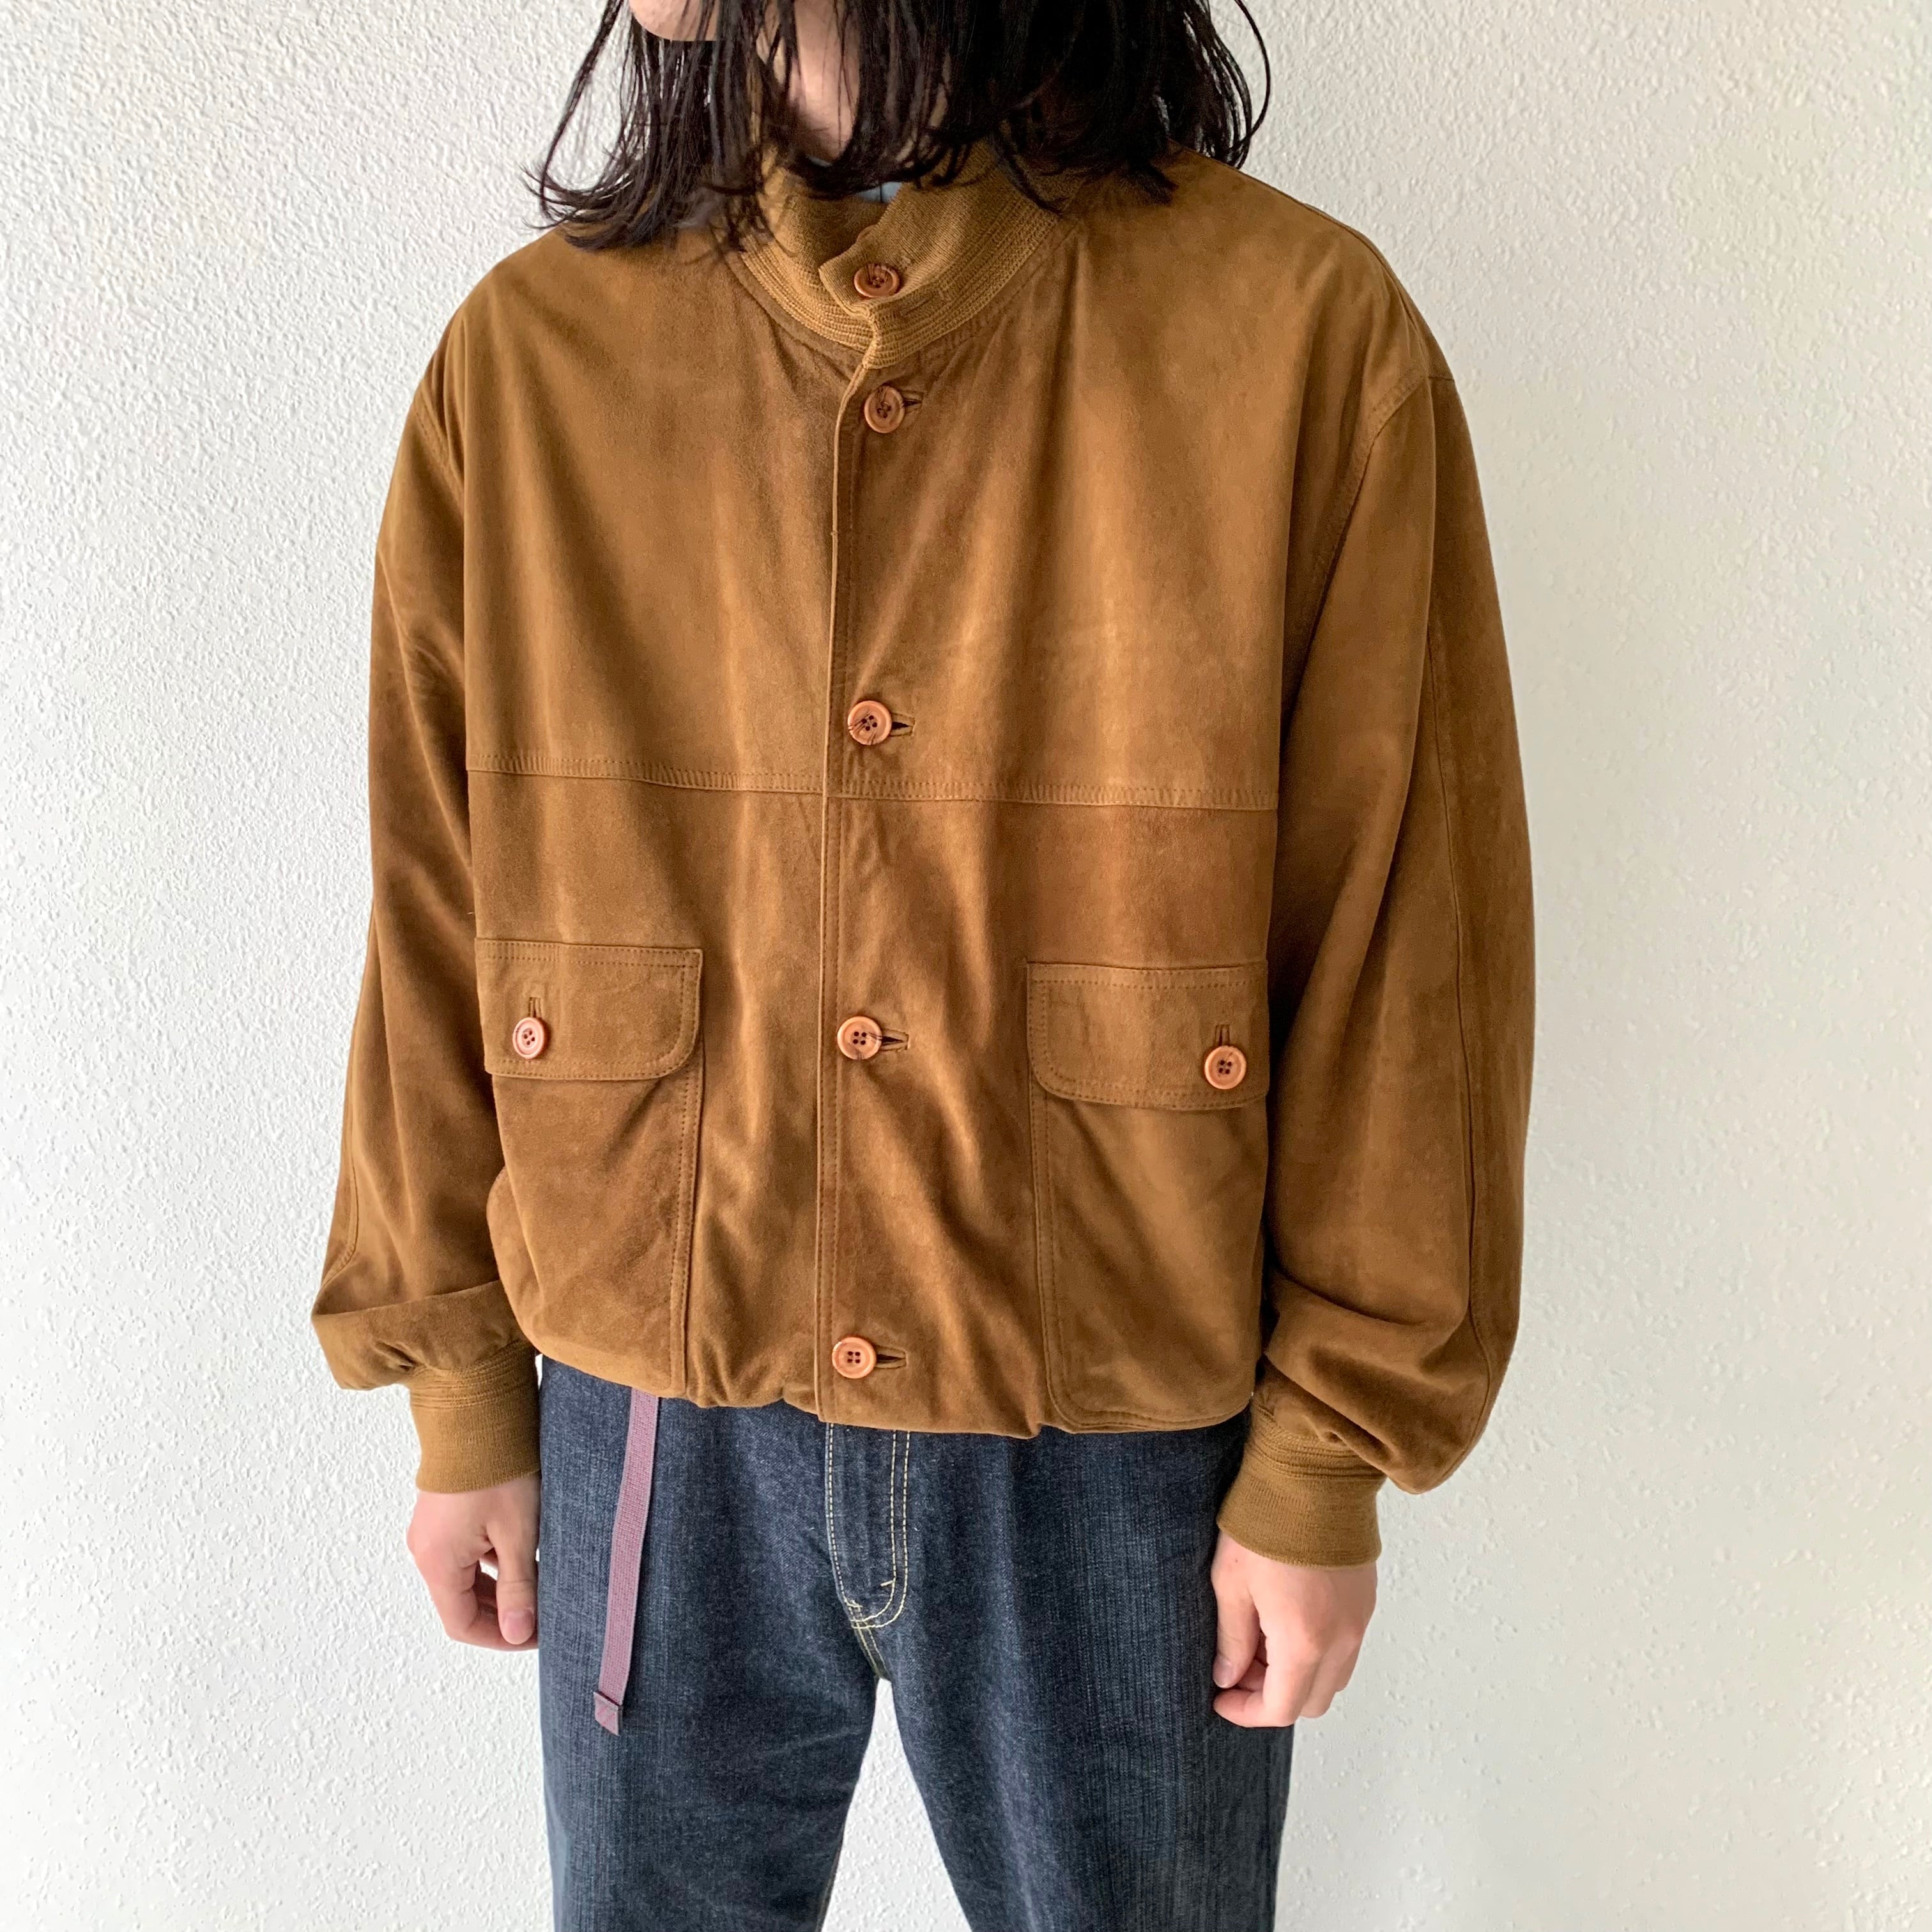 0128 / 1990's suede leather valstar type ブラウン スエードレザー